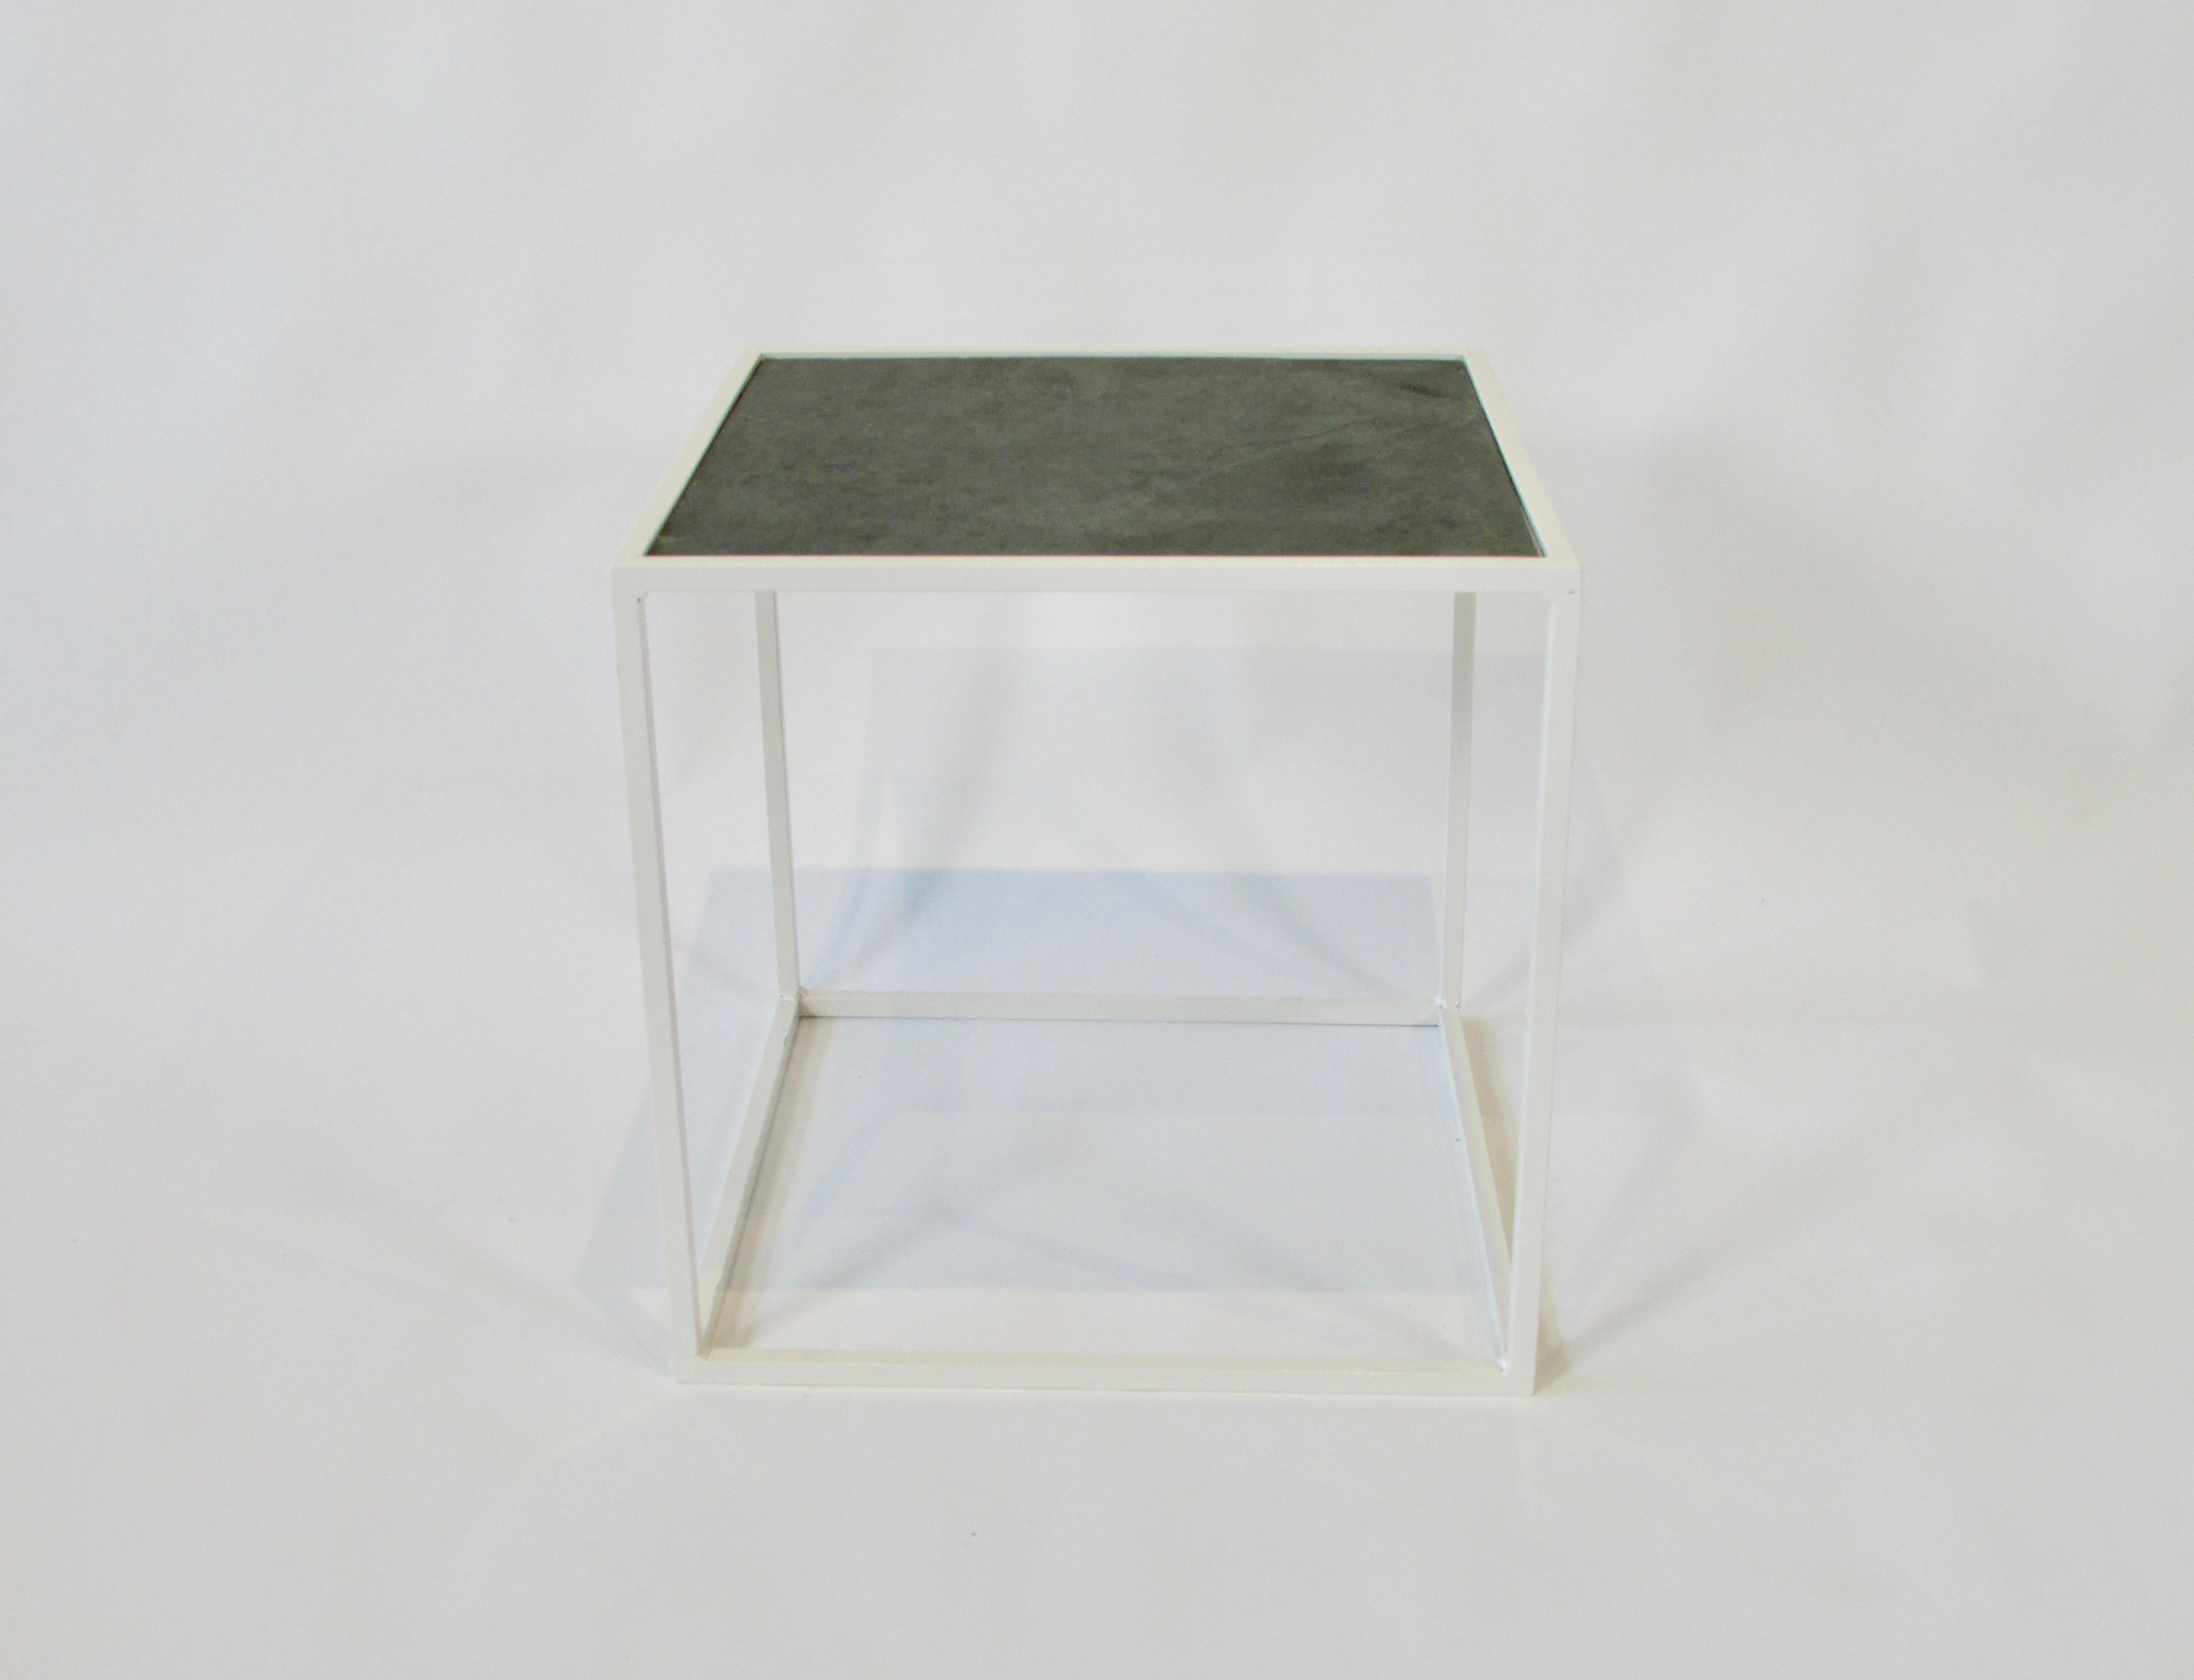 20th Century White Square Steel Frame End Table with Slate Top For Sale